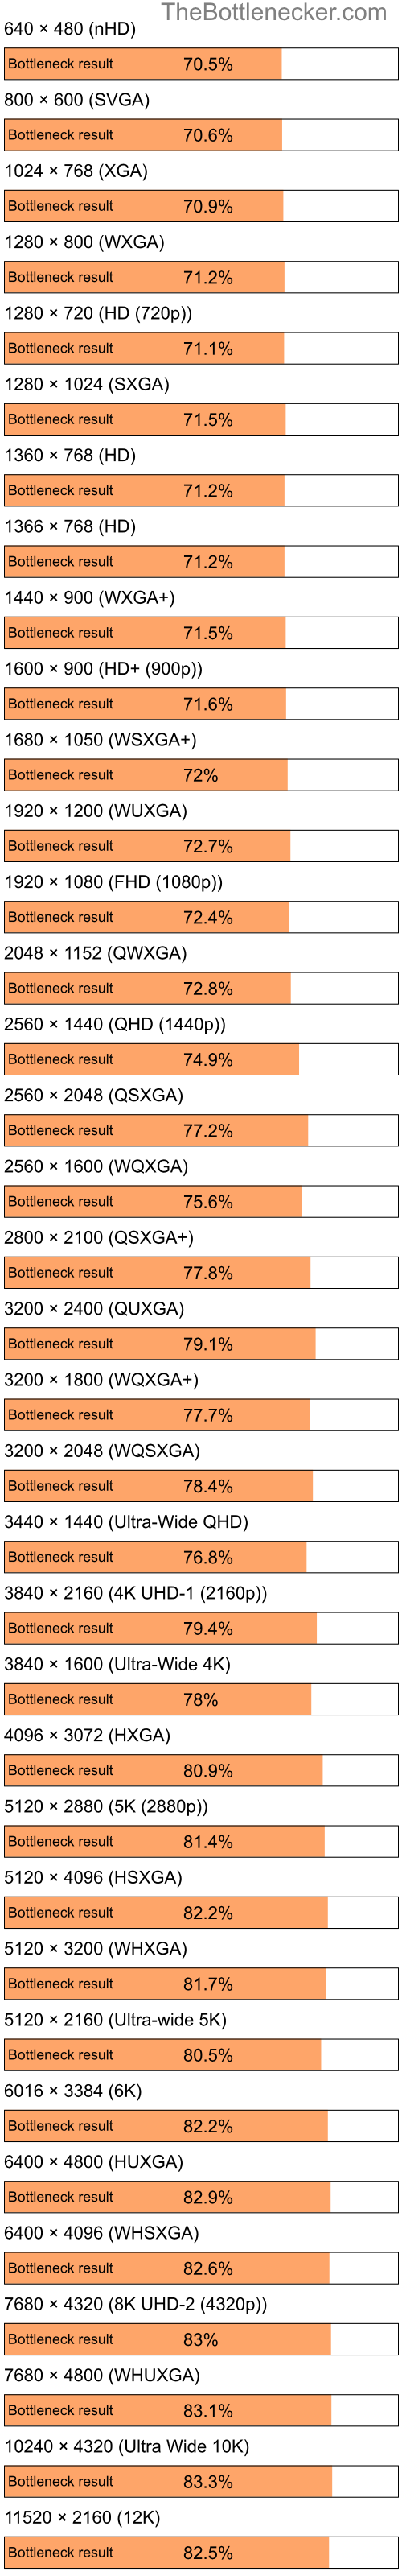 Bottleneck results by resolution for Intel Atom N270 and AMD Mobility Radeon HD 4225 in7 Days to Die